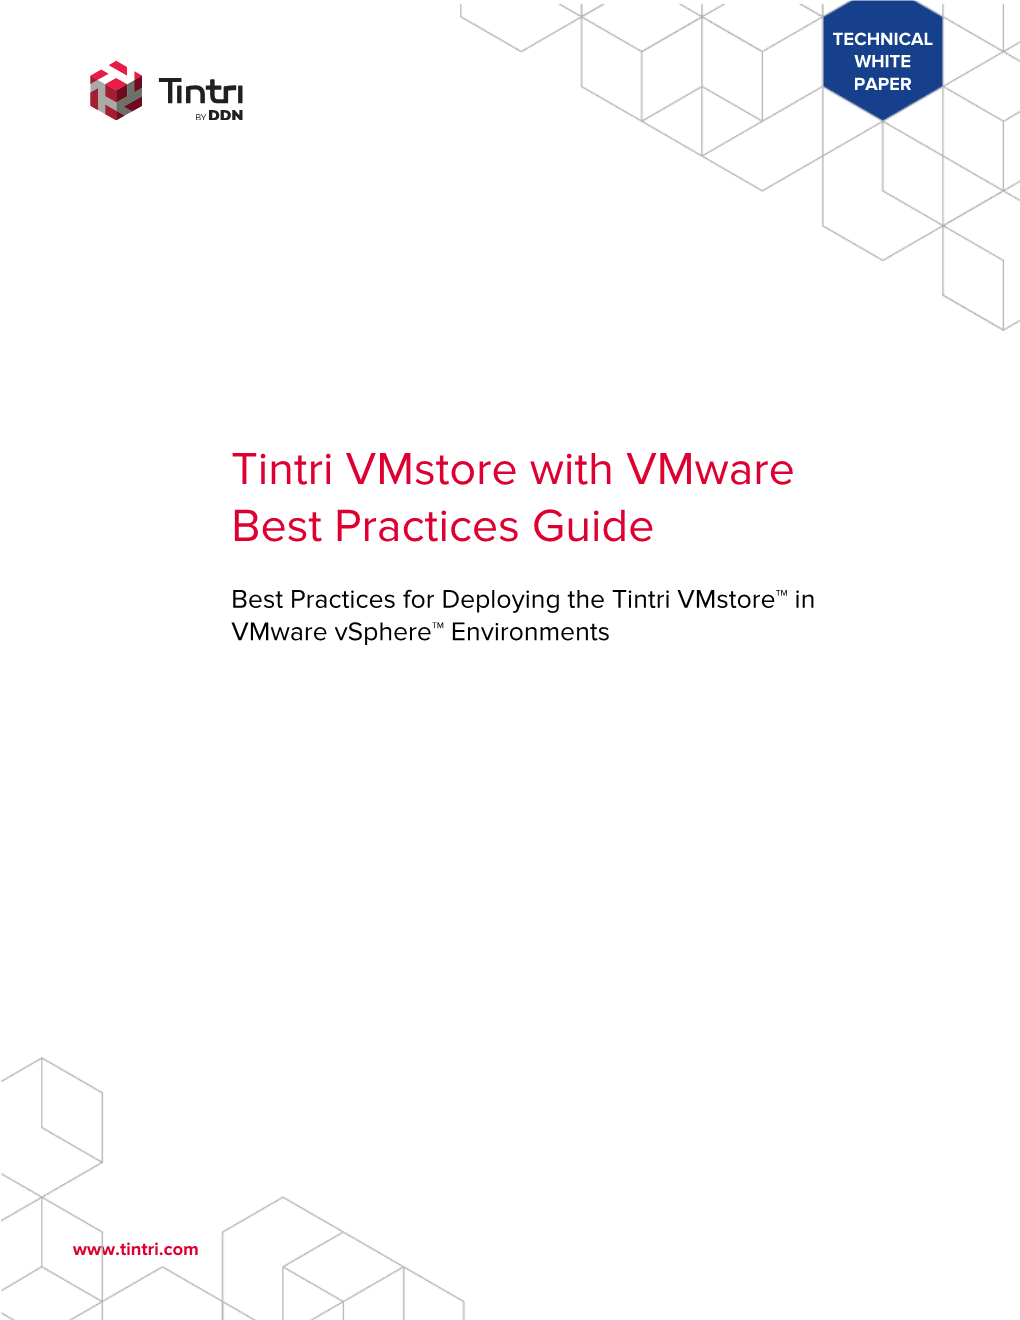 Tintri Vmstore with Vmware Best Practice Guide